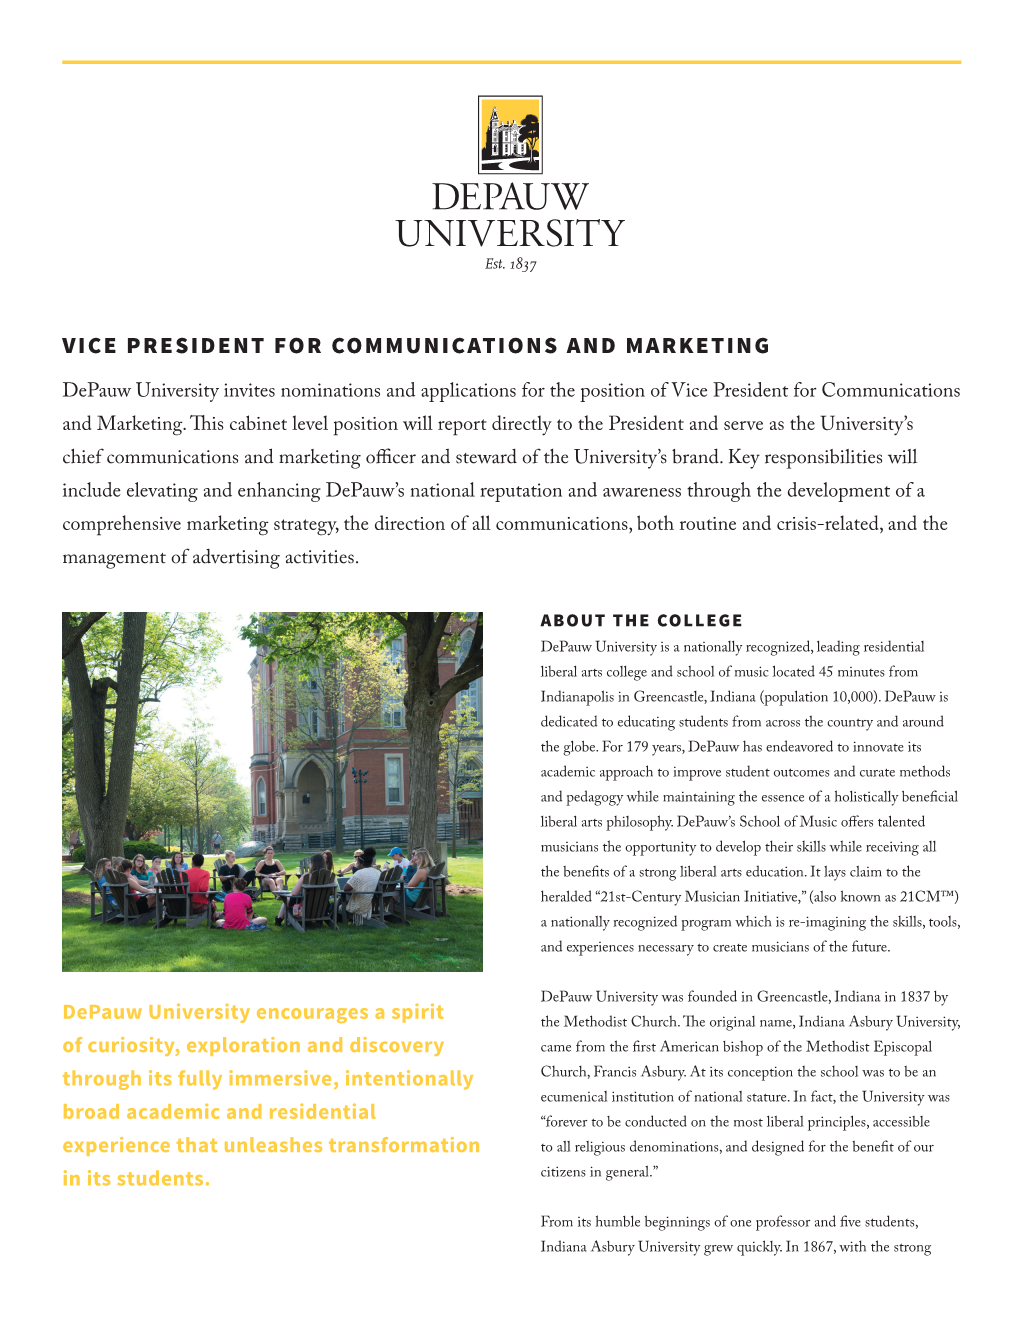 Vice President for Communications and Marketing